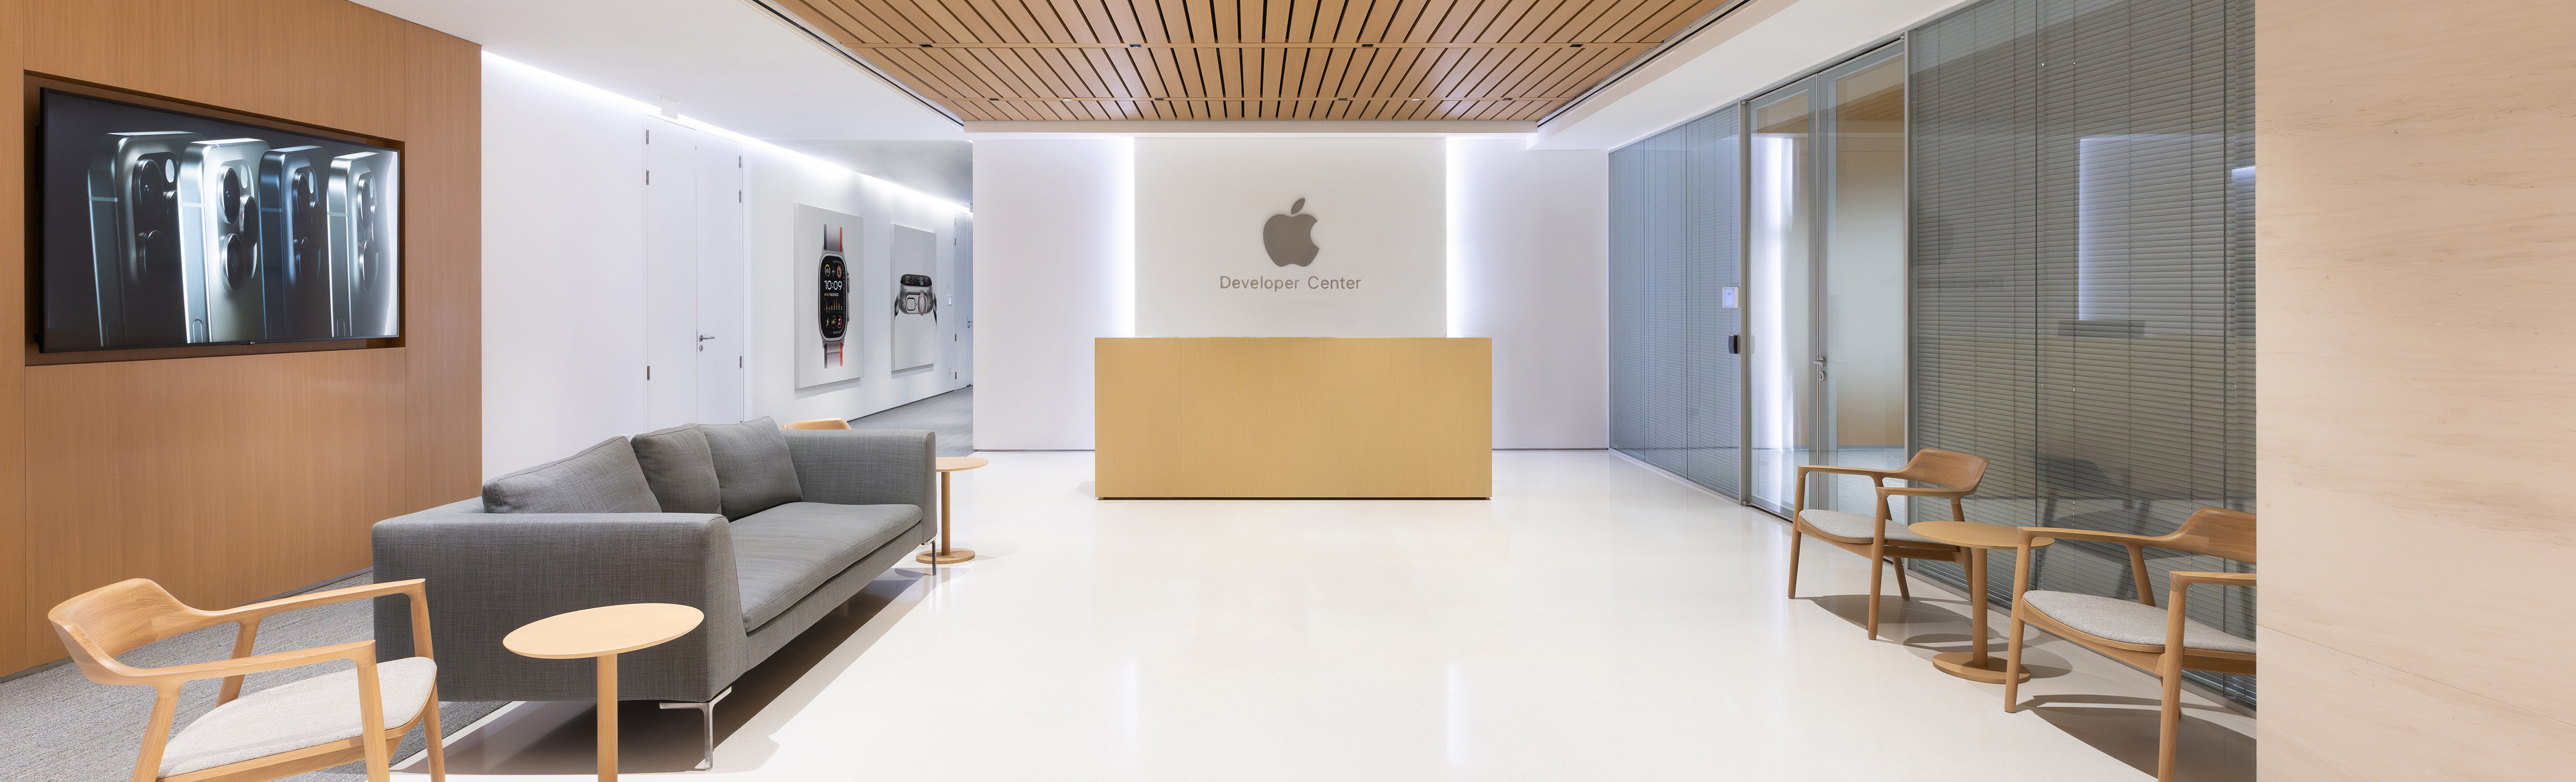 The interior of an Apple Developer Center, an open and brightly lit room with a gray couch, several wooden chairs, and a reception desk that sits underneath a large Apple logo.